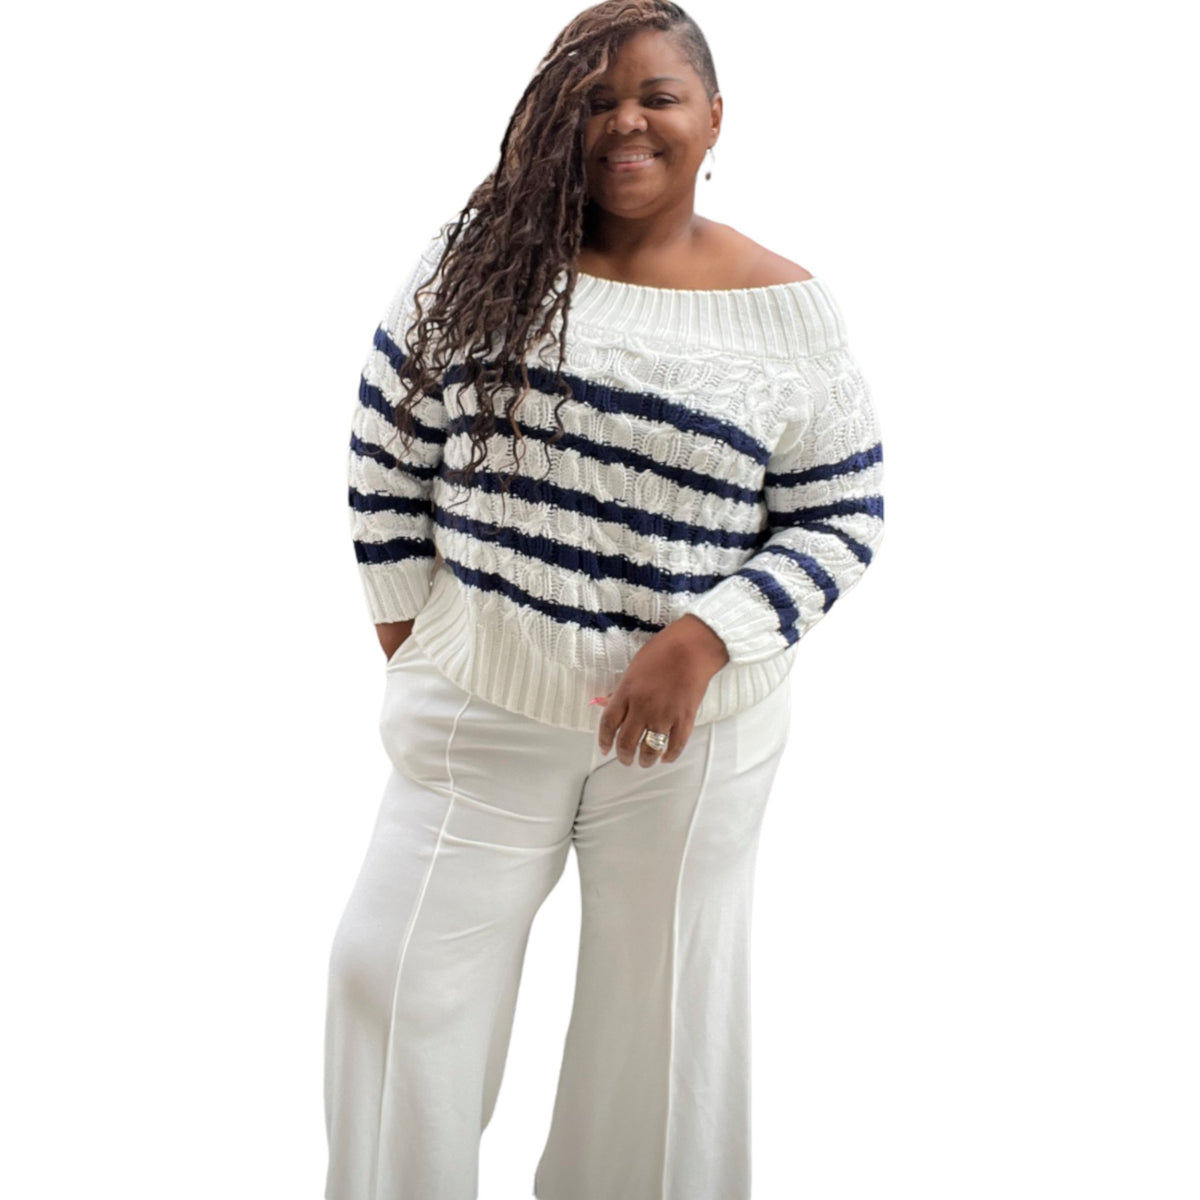 Cable Knit Soft Plus Size Sweater - Fabulously Dressed Boutique 